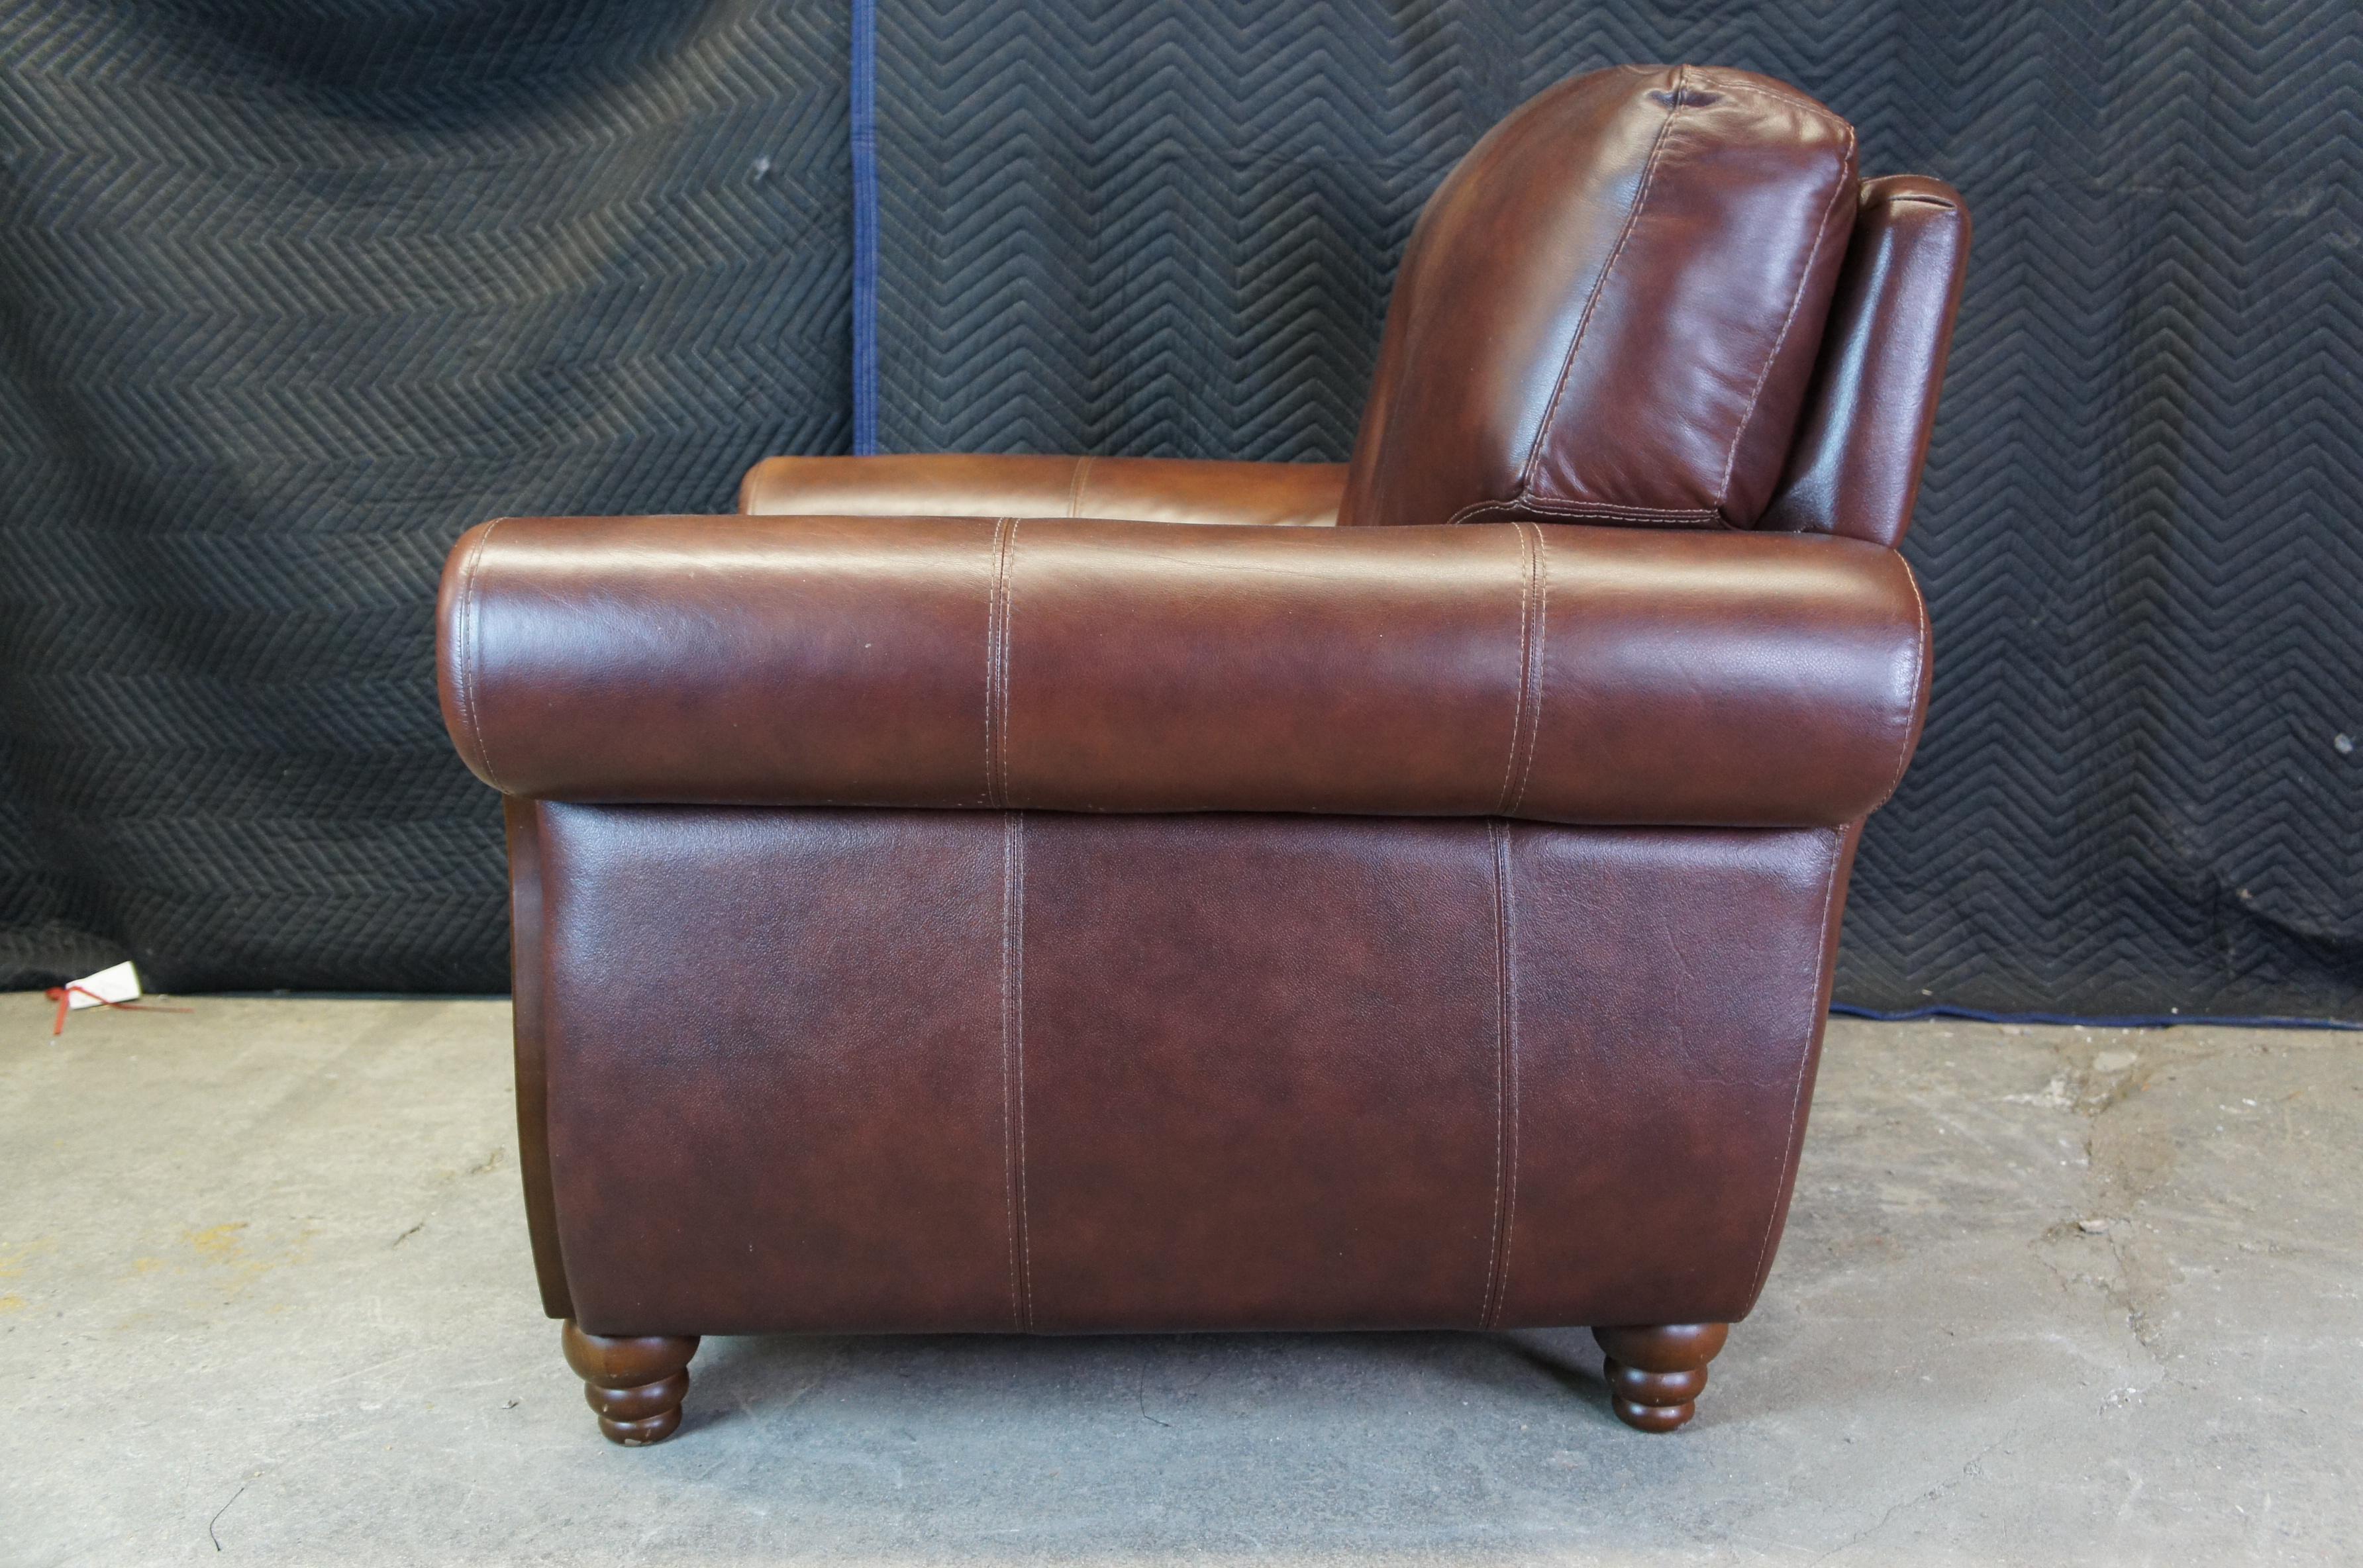 20th Century Vintage Chateau D'Ax Divani Italian Brown Leather Library Club Rolled Arm Chair